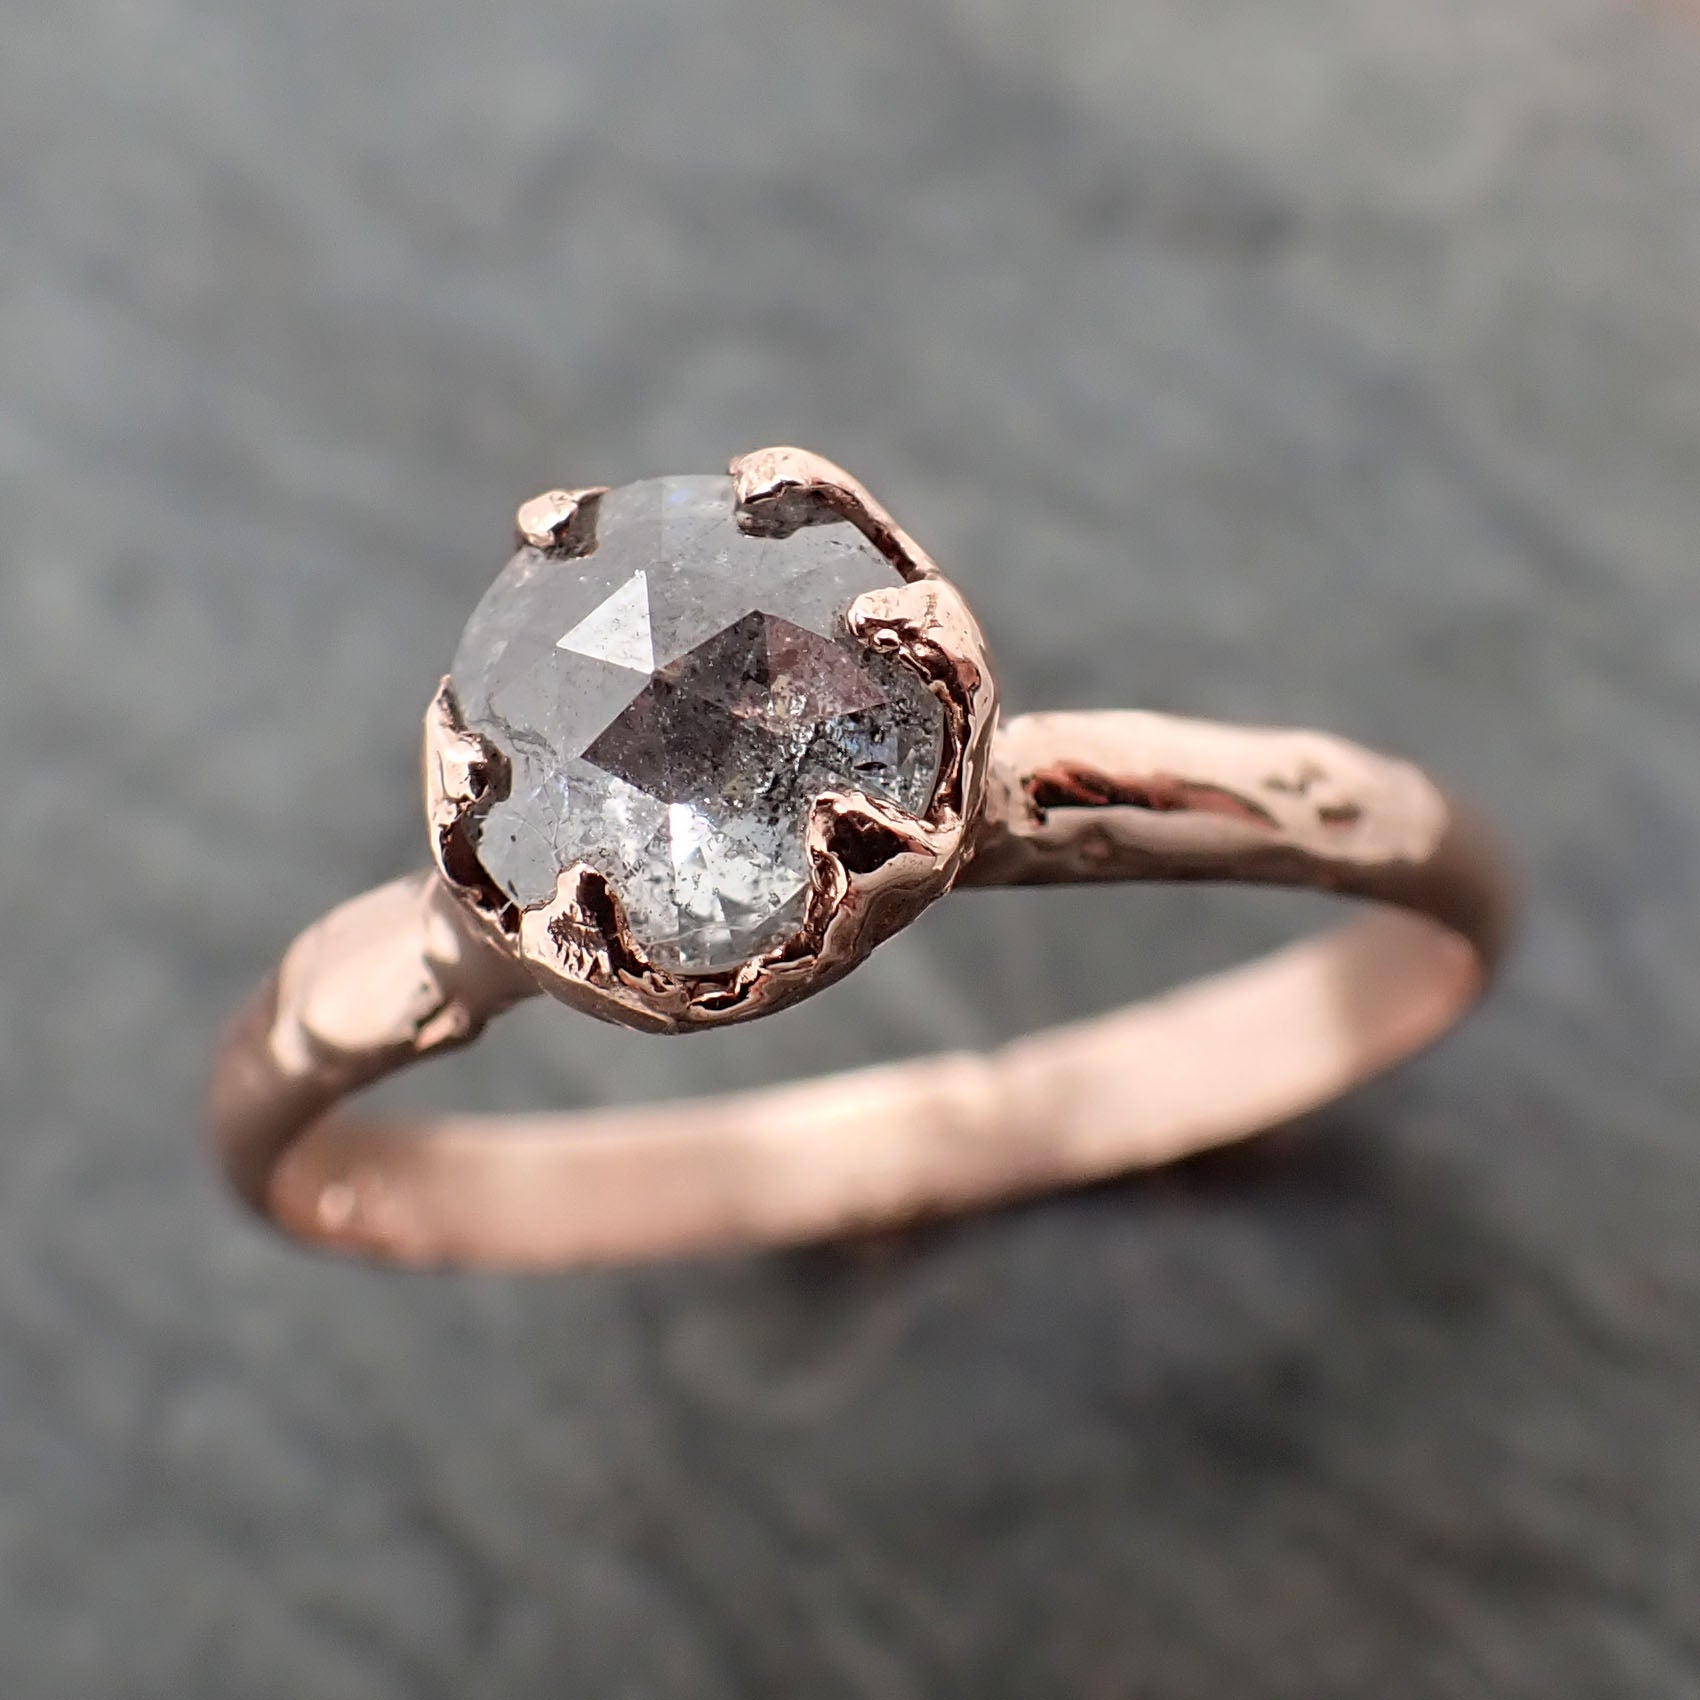 Faceted Fancy cut salt and pepper Diamond Solitaire Engagement 14k Rose Gold Wedding Ring byAngeline 2350